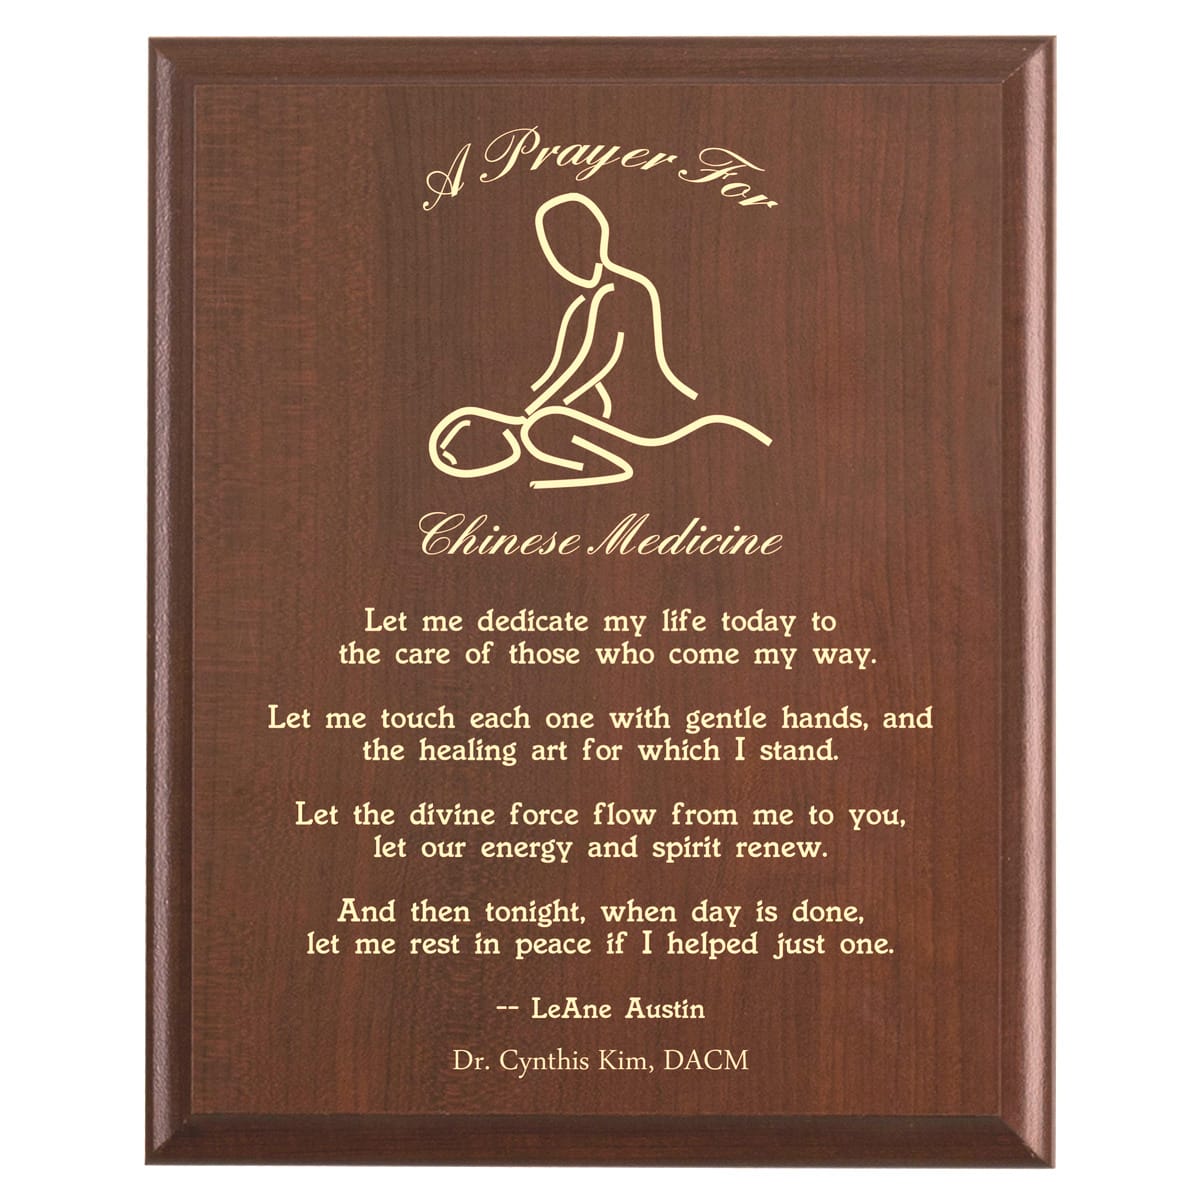 Plaque photo: Chinese Medicine Degree Prayer Plaque design with free personalization. Wood style finish with customized text.